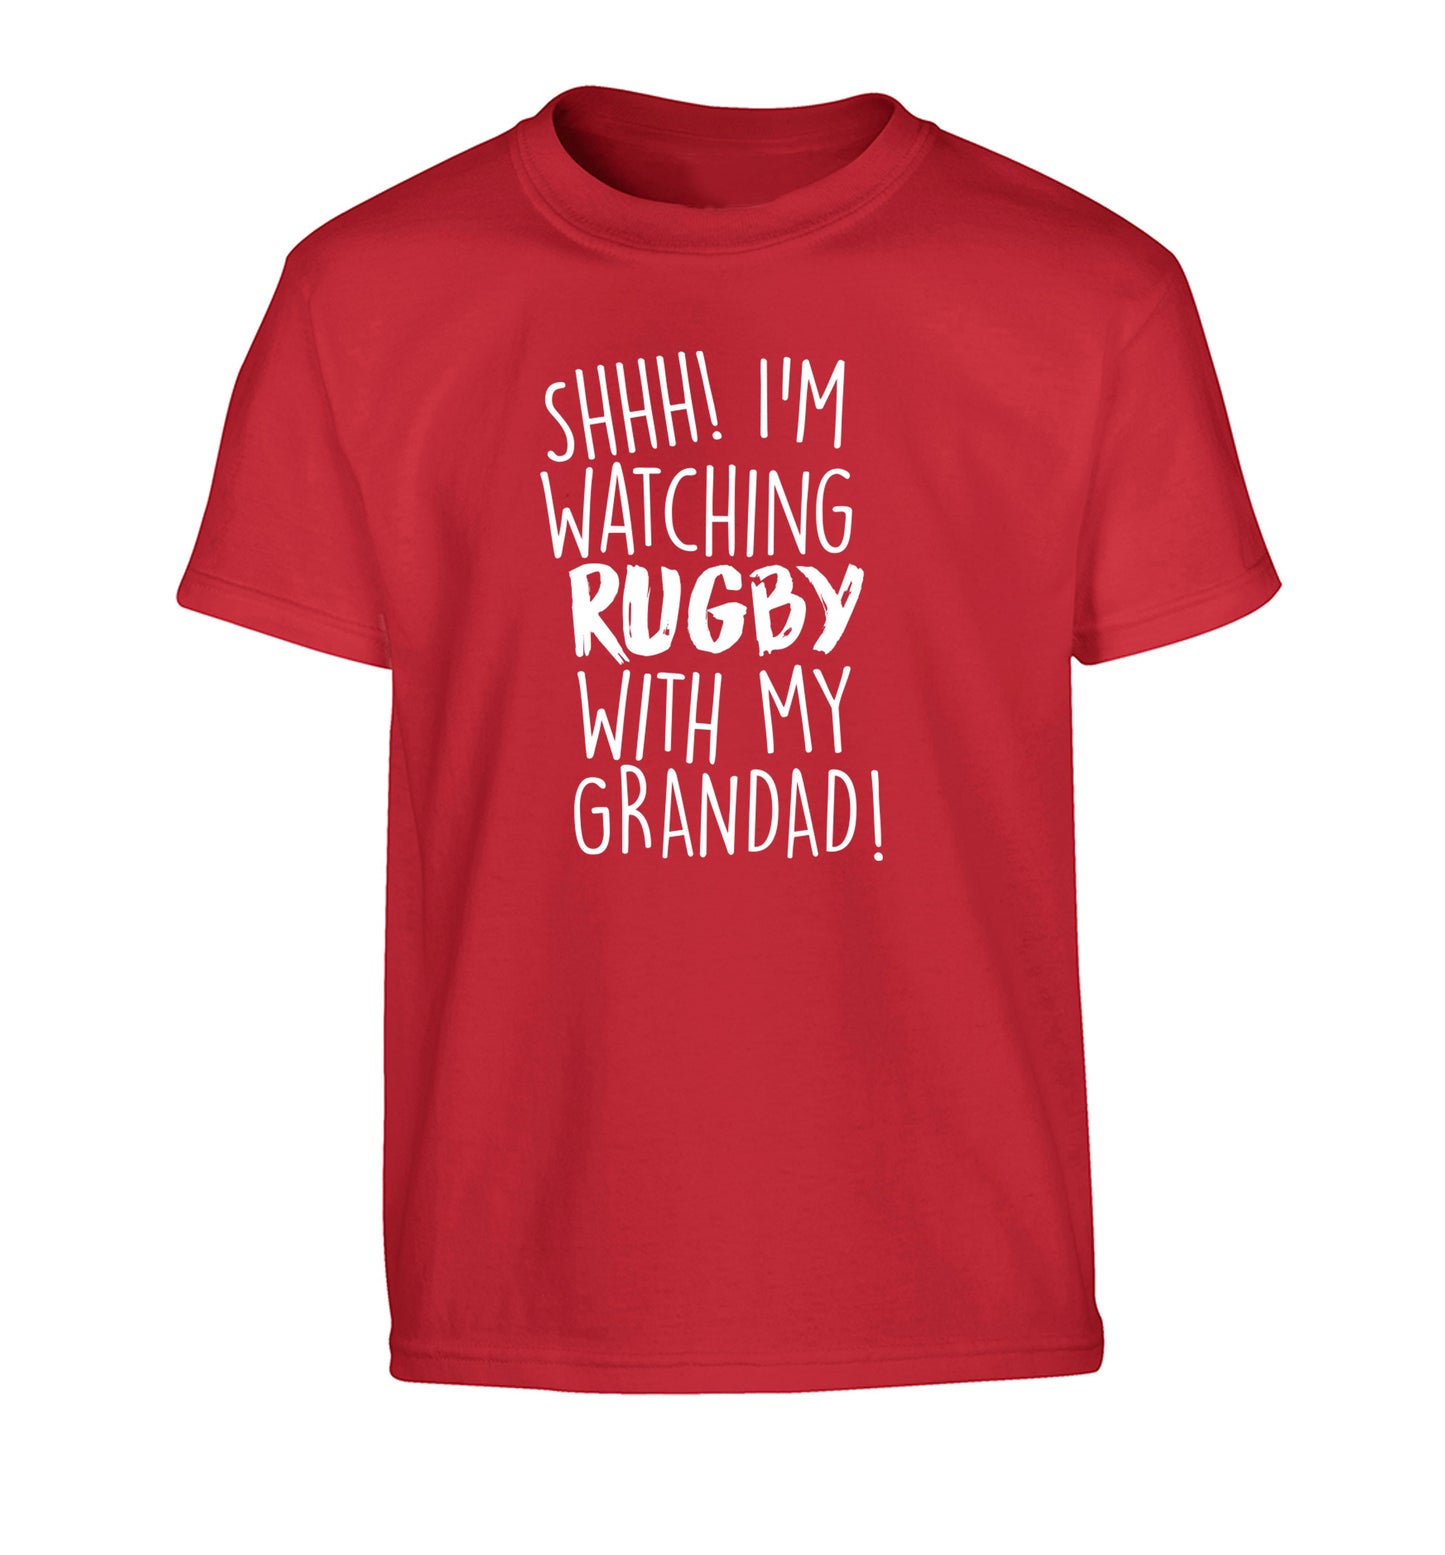 Shh I'm watching rugby with my grandad Children's red Tshirt 12-13 Years